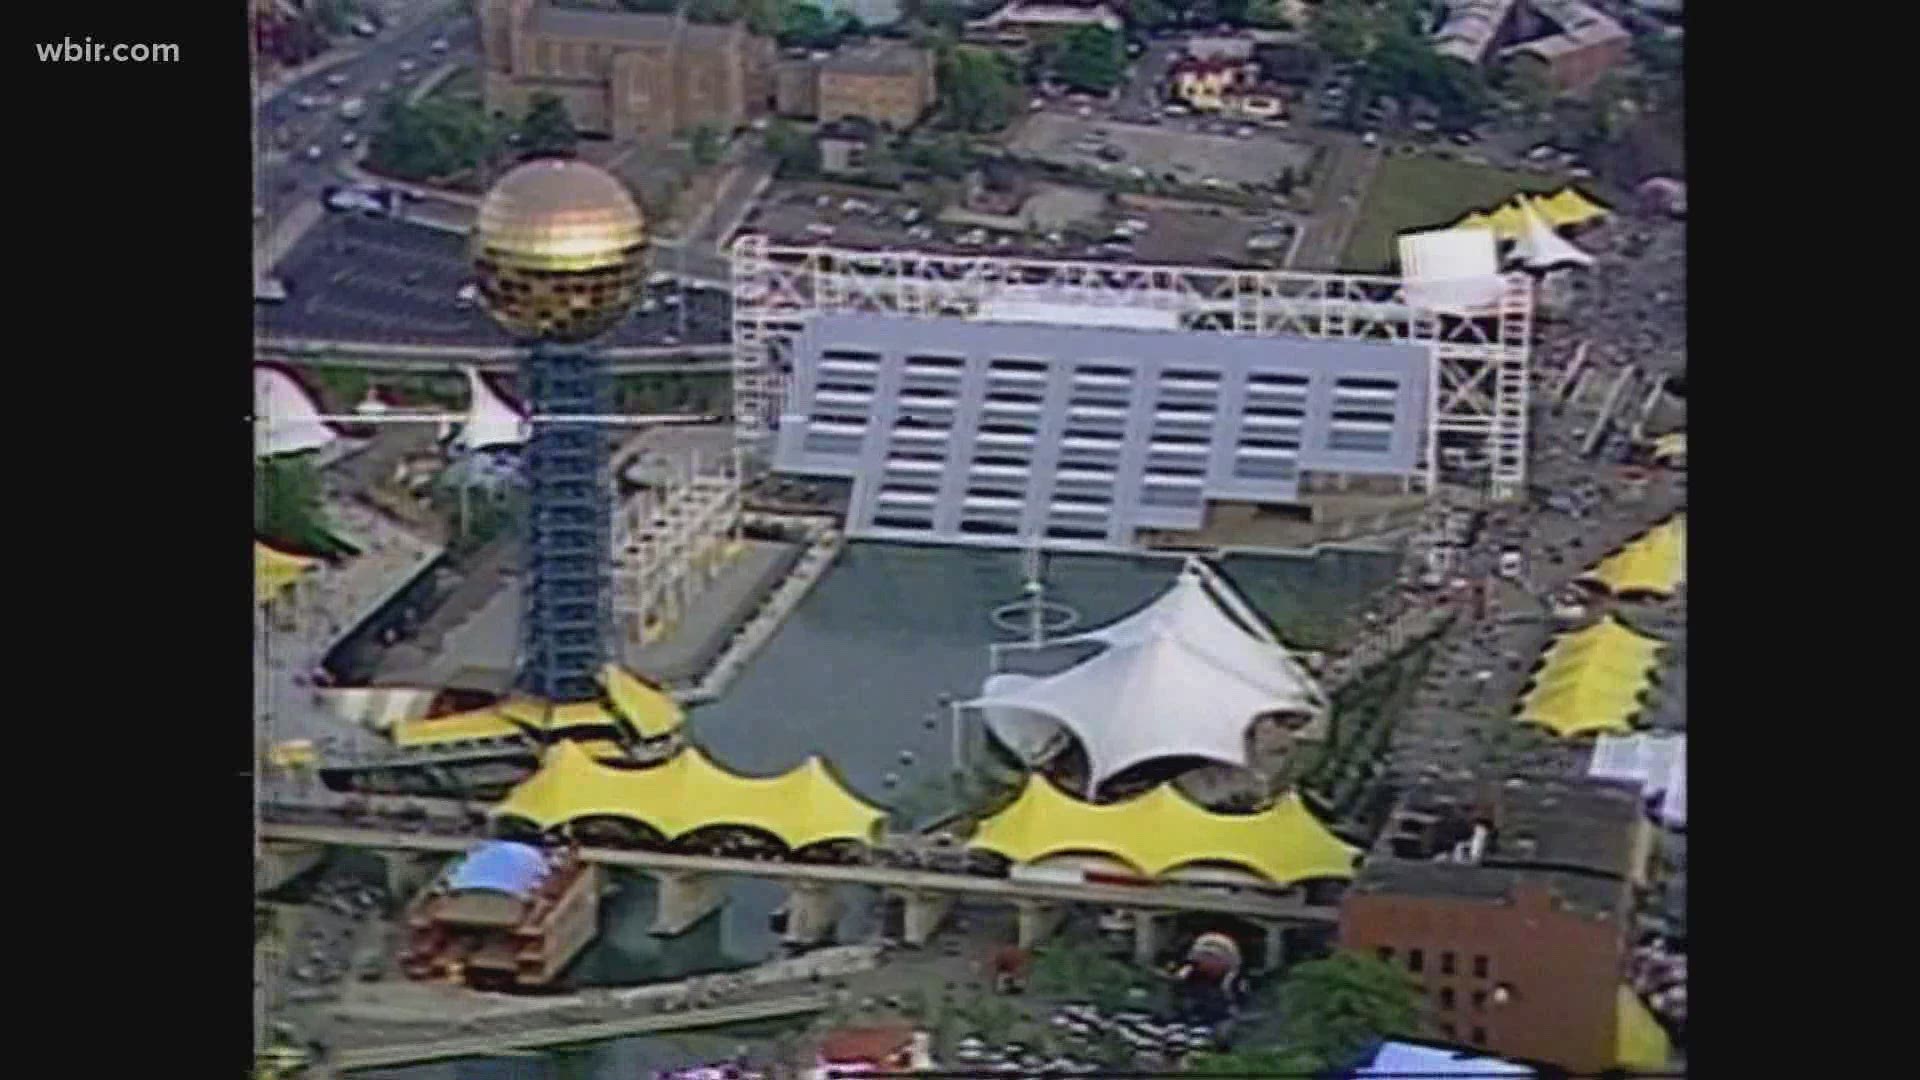 Saturday marks 39 years since Knoxville pulled off the 1982 World's Fair!